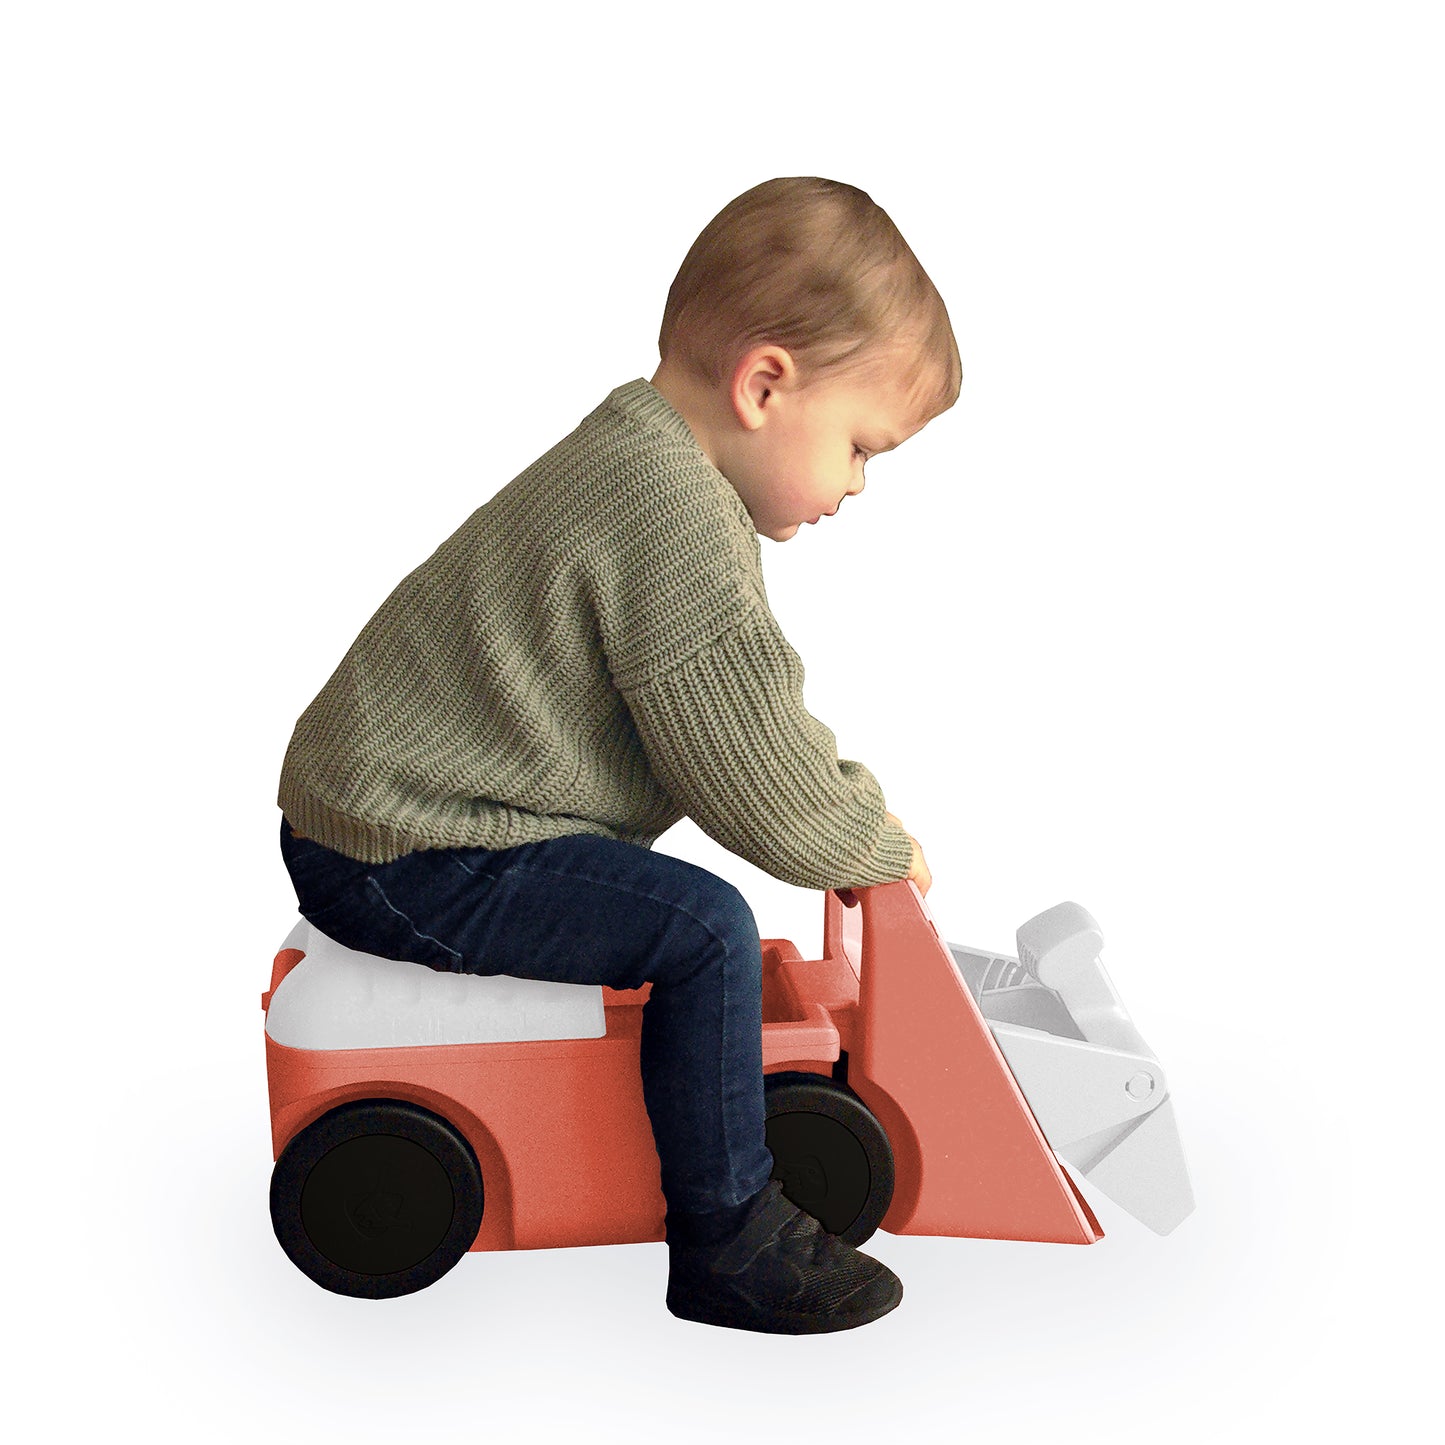 BLOCKIE - Chillafish Blockie 4-wheel first ride-on that cleans up and carries all your toys